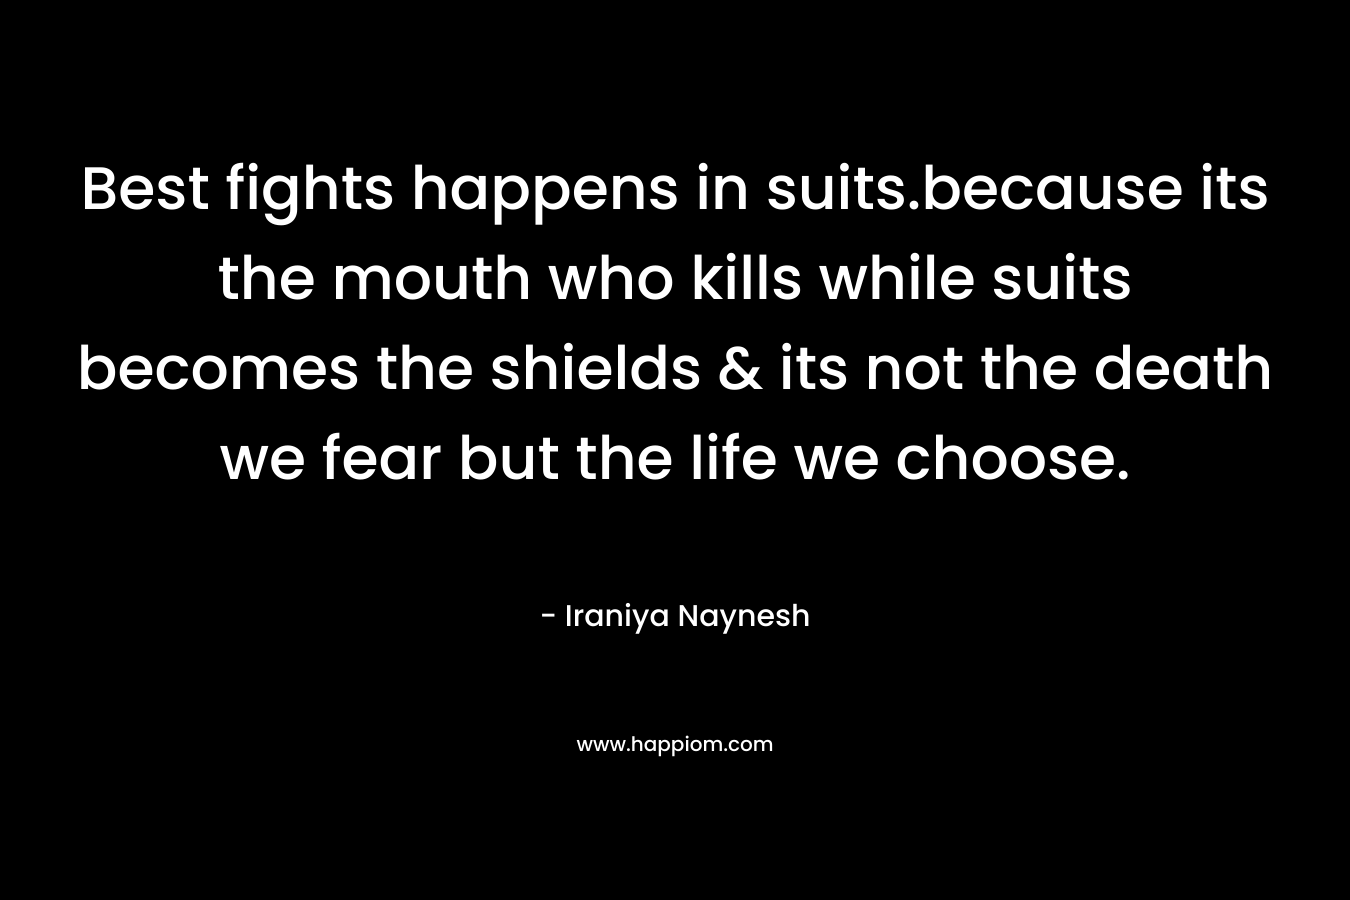 Best fights happens in suits.because its the mouth who kills while suits becomes the shields & its not the death we fear but the life we choose.